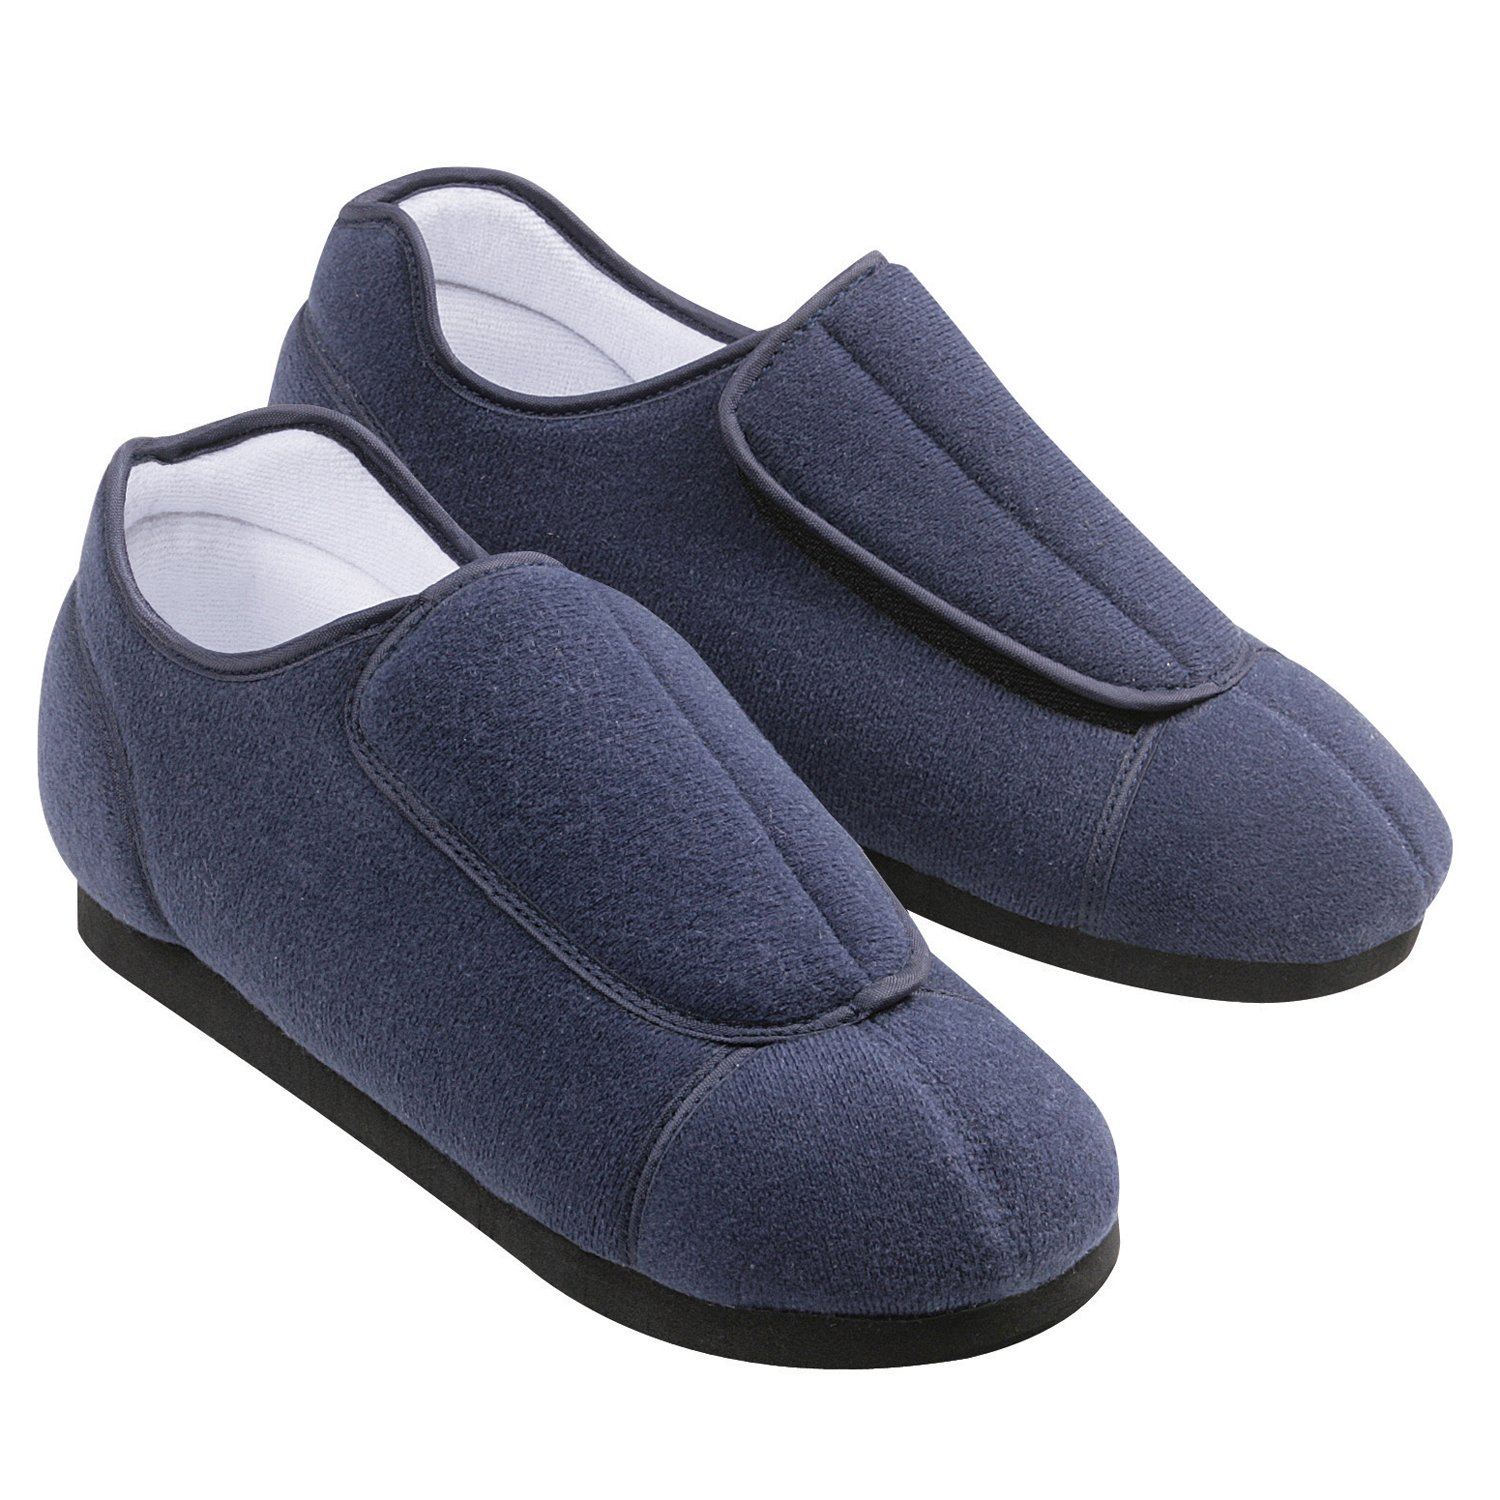 Health Slippers - Have You Tried A Pair Of Them Yet?